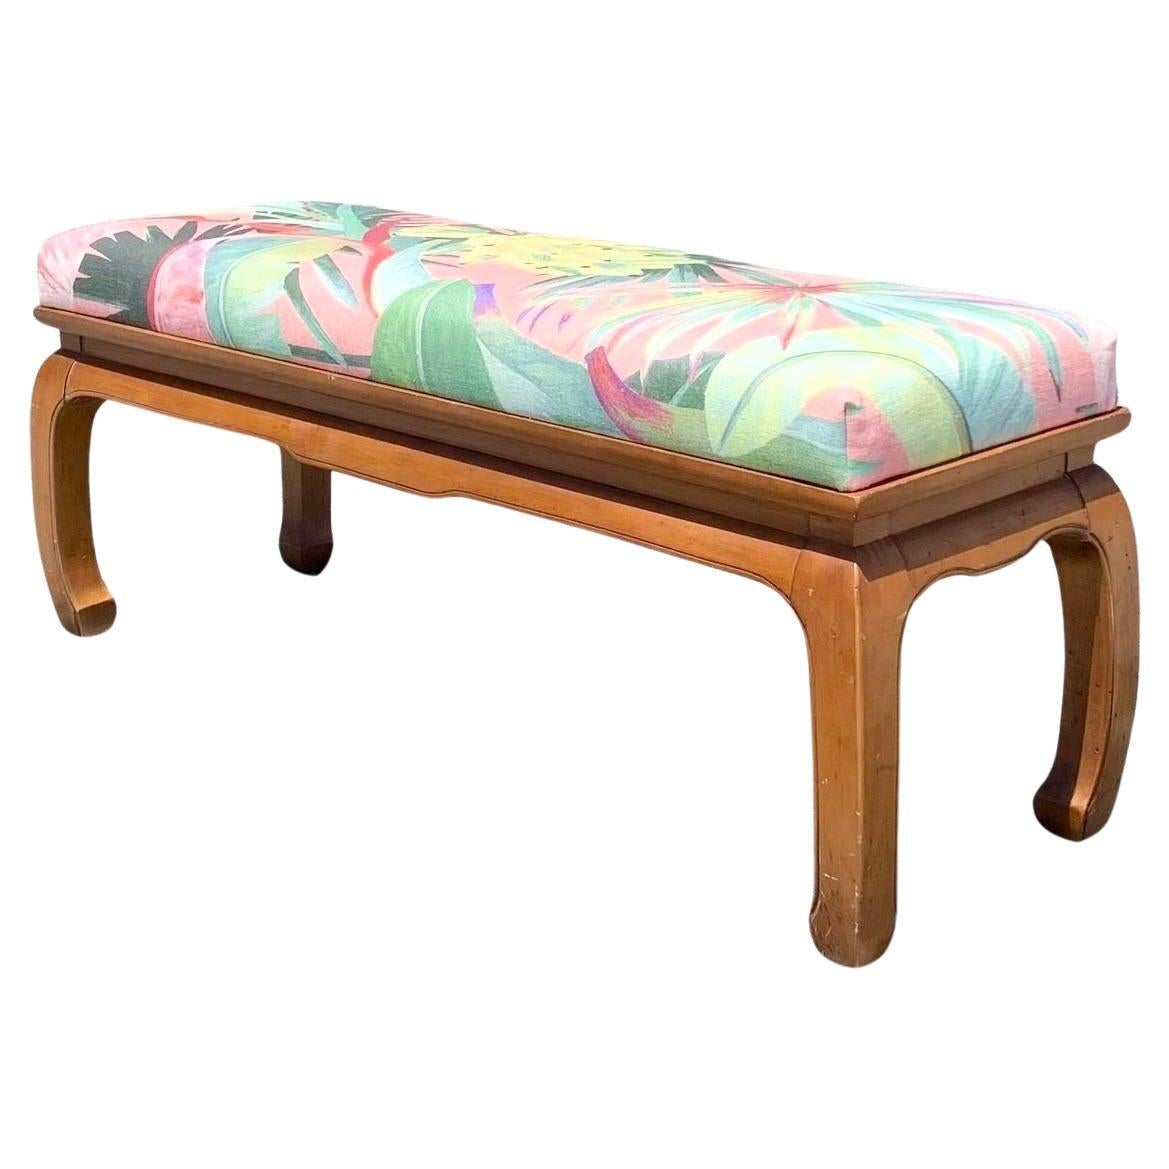 Vintage Century Chair Company Ming Foot Wood Bench With Mokum La Palma Seat For Sale